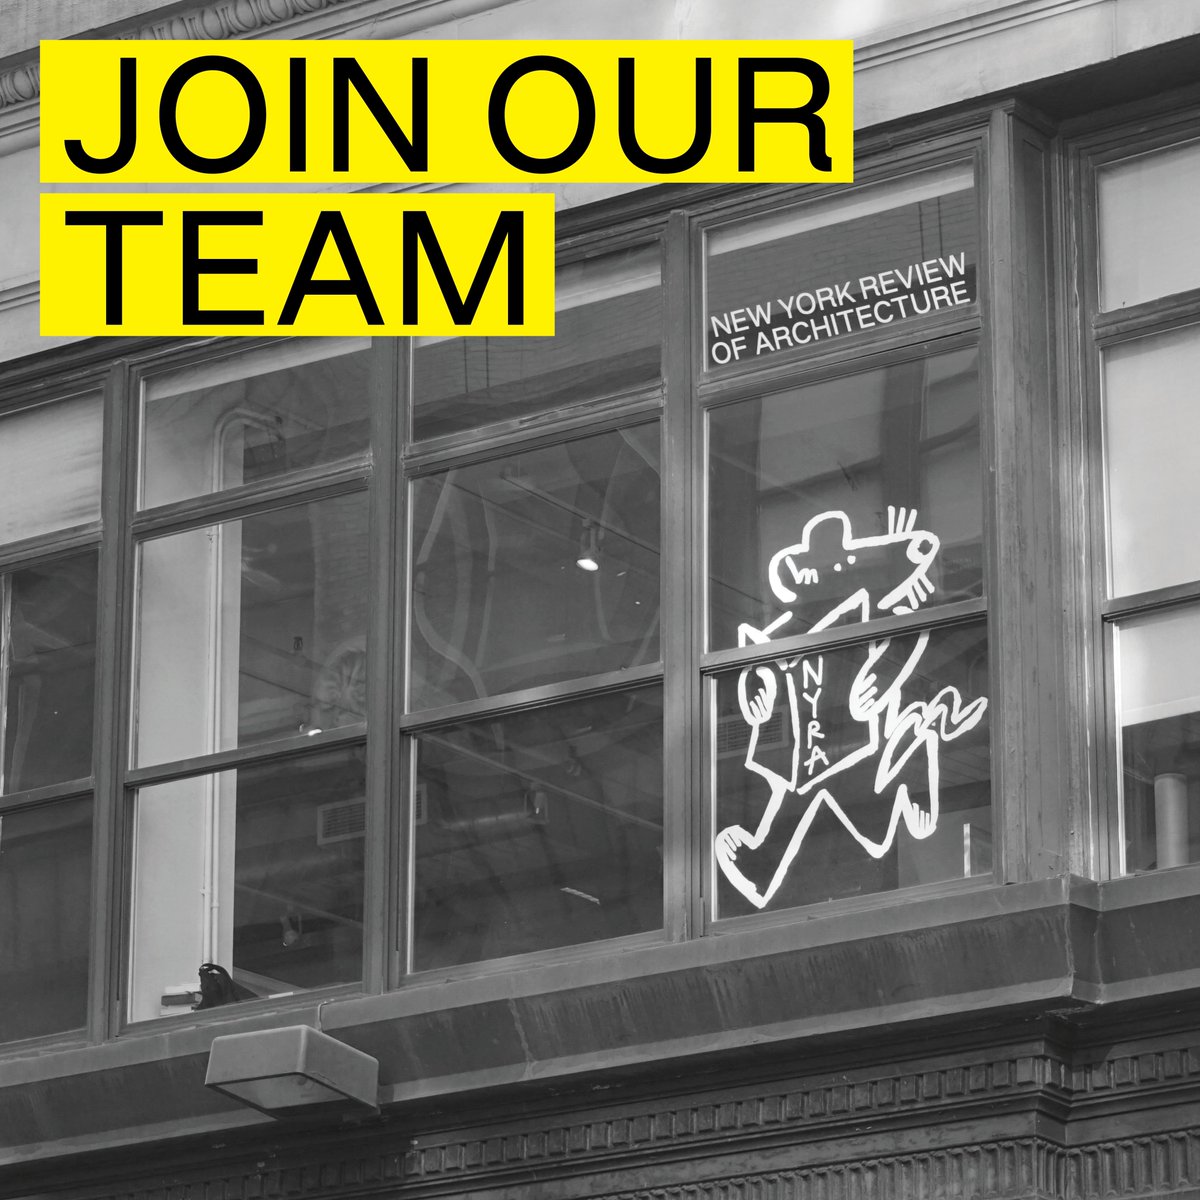 New York Review of Architecture is seeking to hire a Managing Editor to help us keep the wheels of our architectural publishing juggernaut rolling. We are interested in filling this position by May 1. Find further details and submit your application at nyra.nyc/job-opening